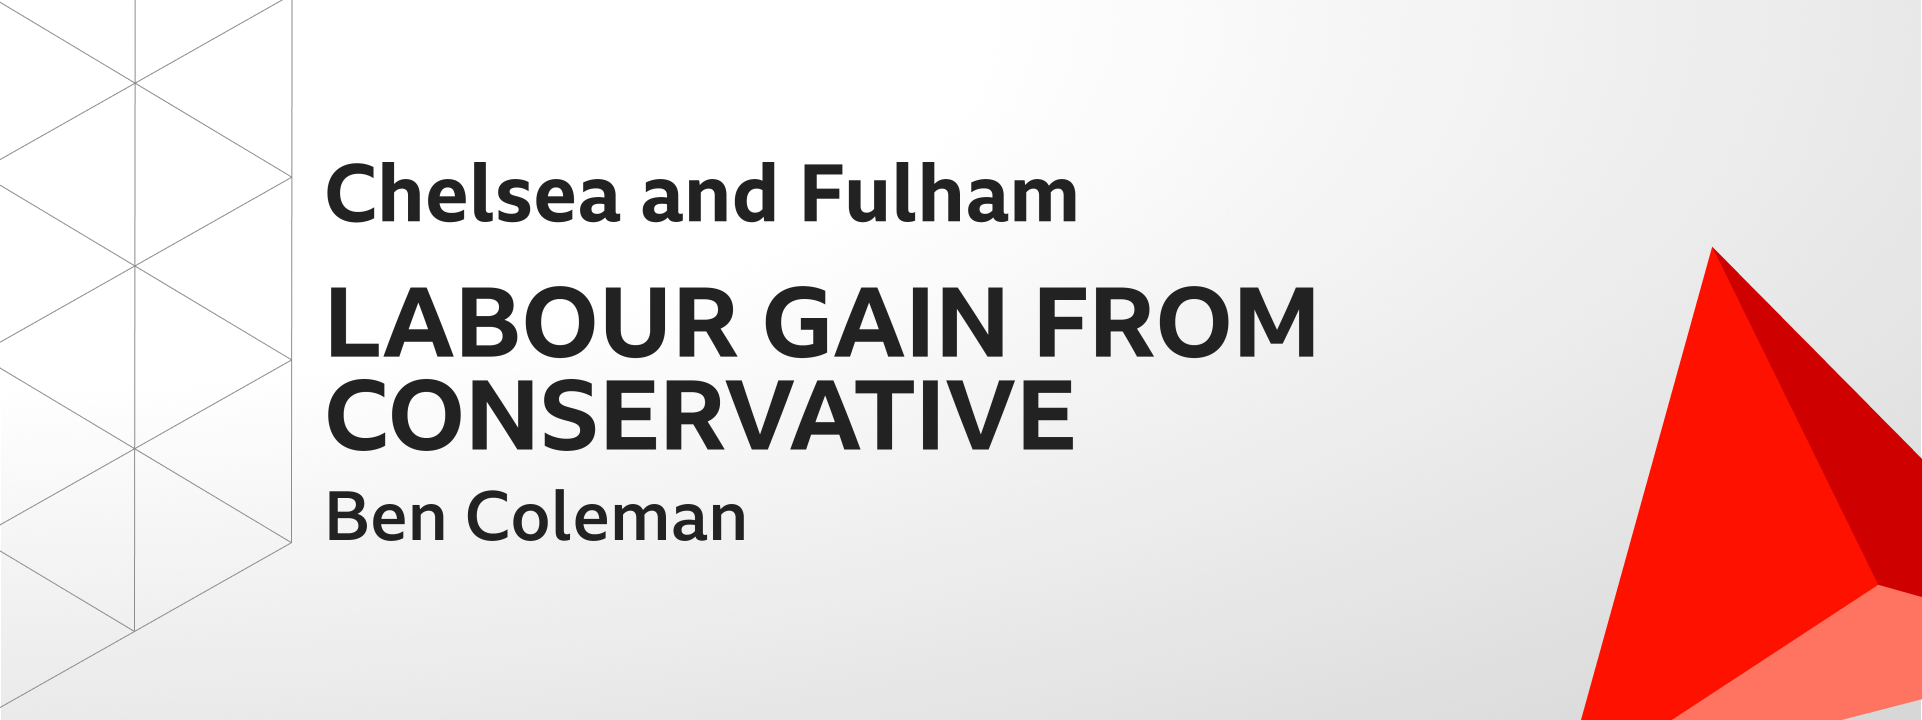 Graphic showing Labour gains Chelsea and Fulham from the Conservatives. The winning candidate was Ben Coleman.